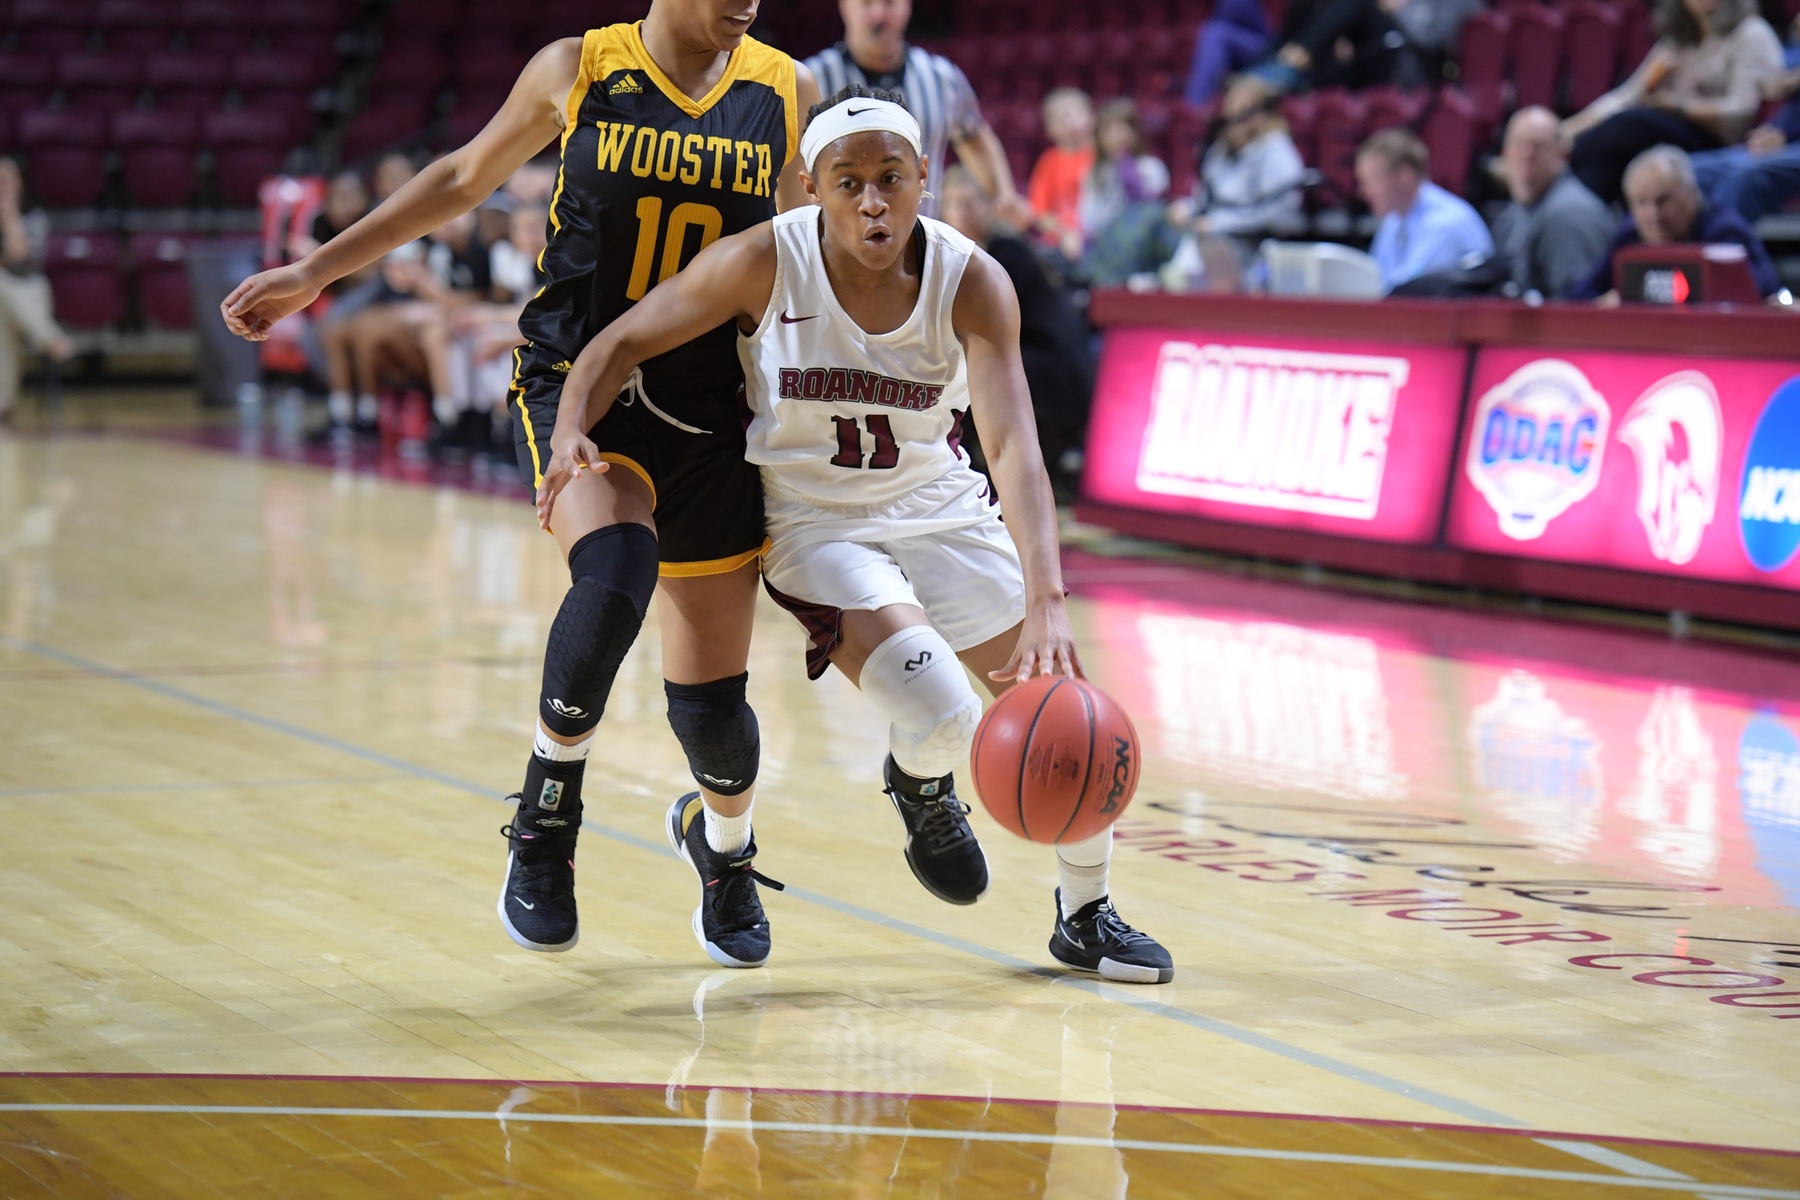 Whitney Hopson scored 17 points and added 12 assists to lead Roanoke to a 83-59 win over Emory & Henry on Wednesday.